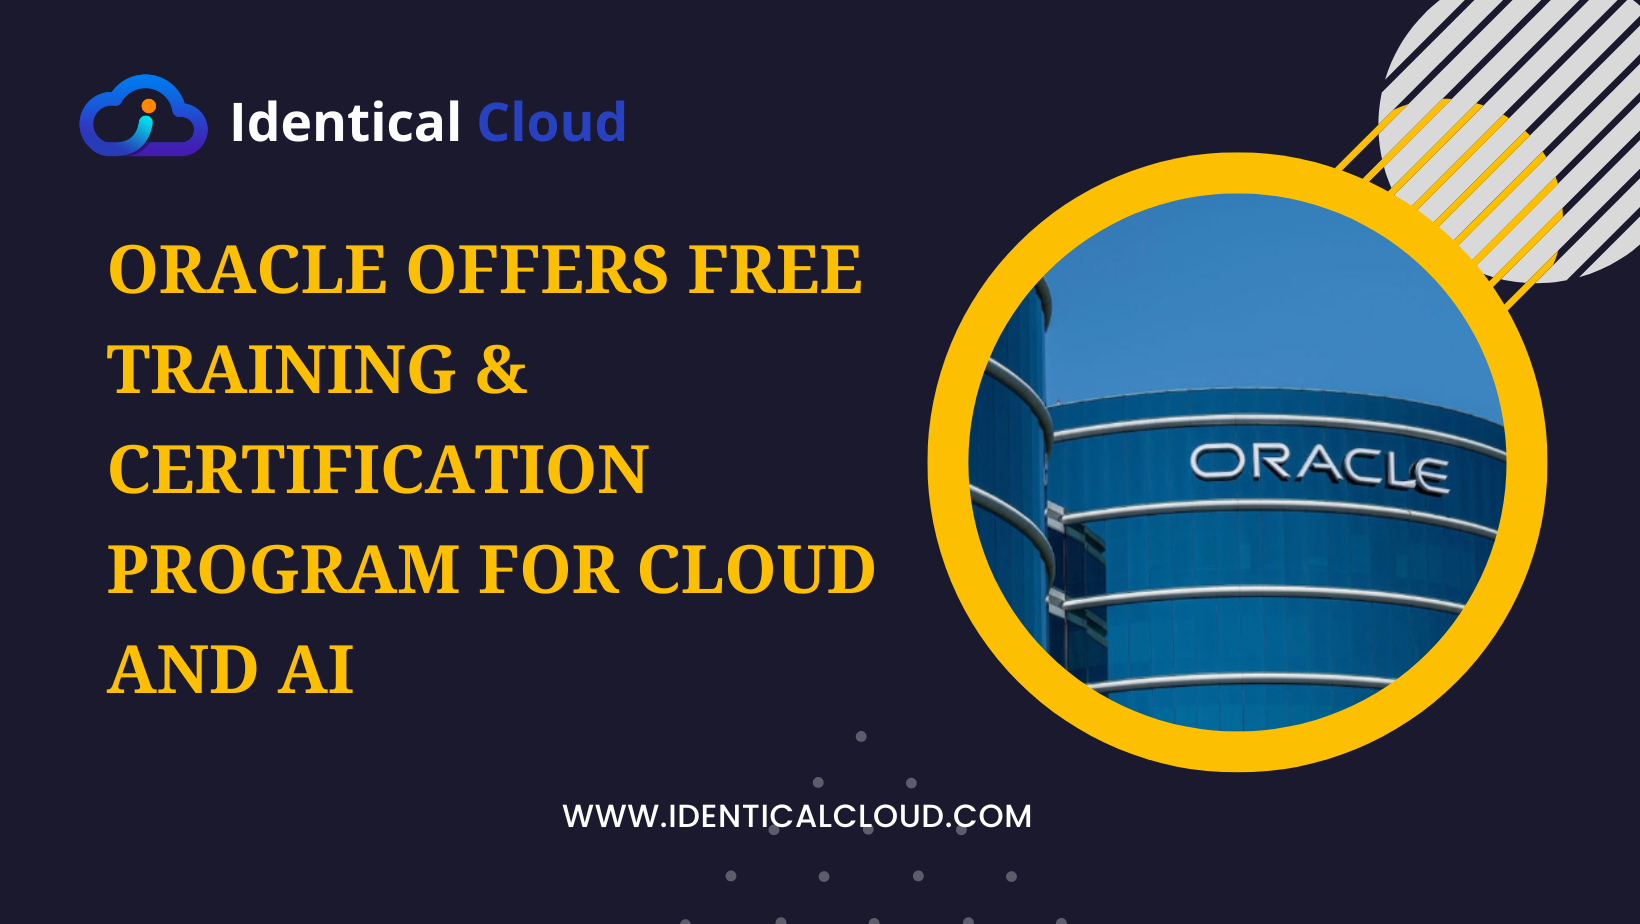 Oracle offers Free Training & Certification Program for Cloud and AI - identicalcloud.com